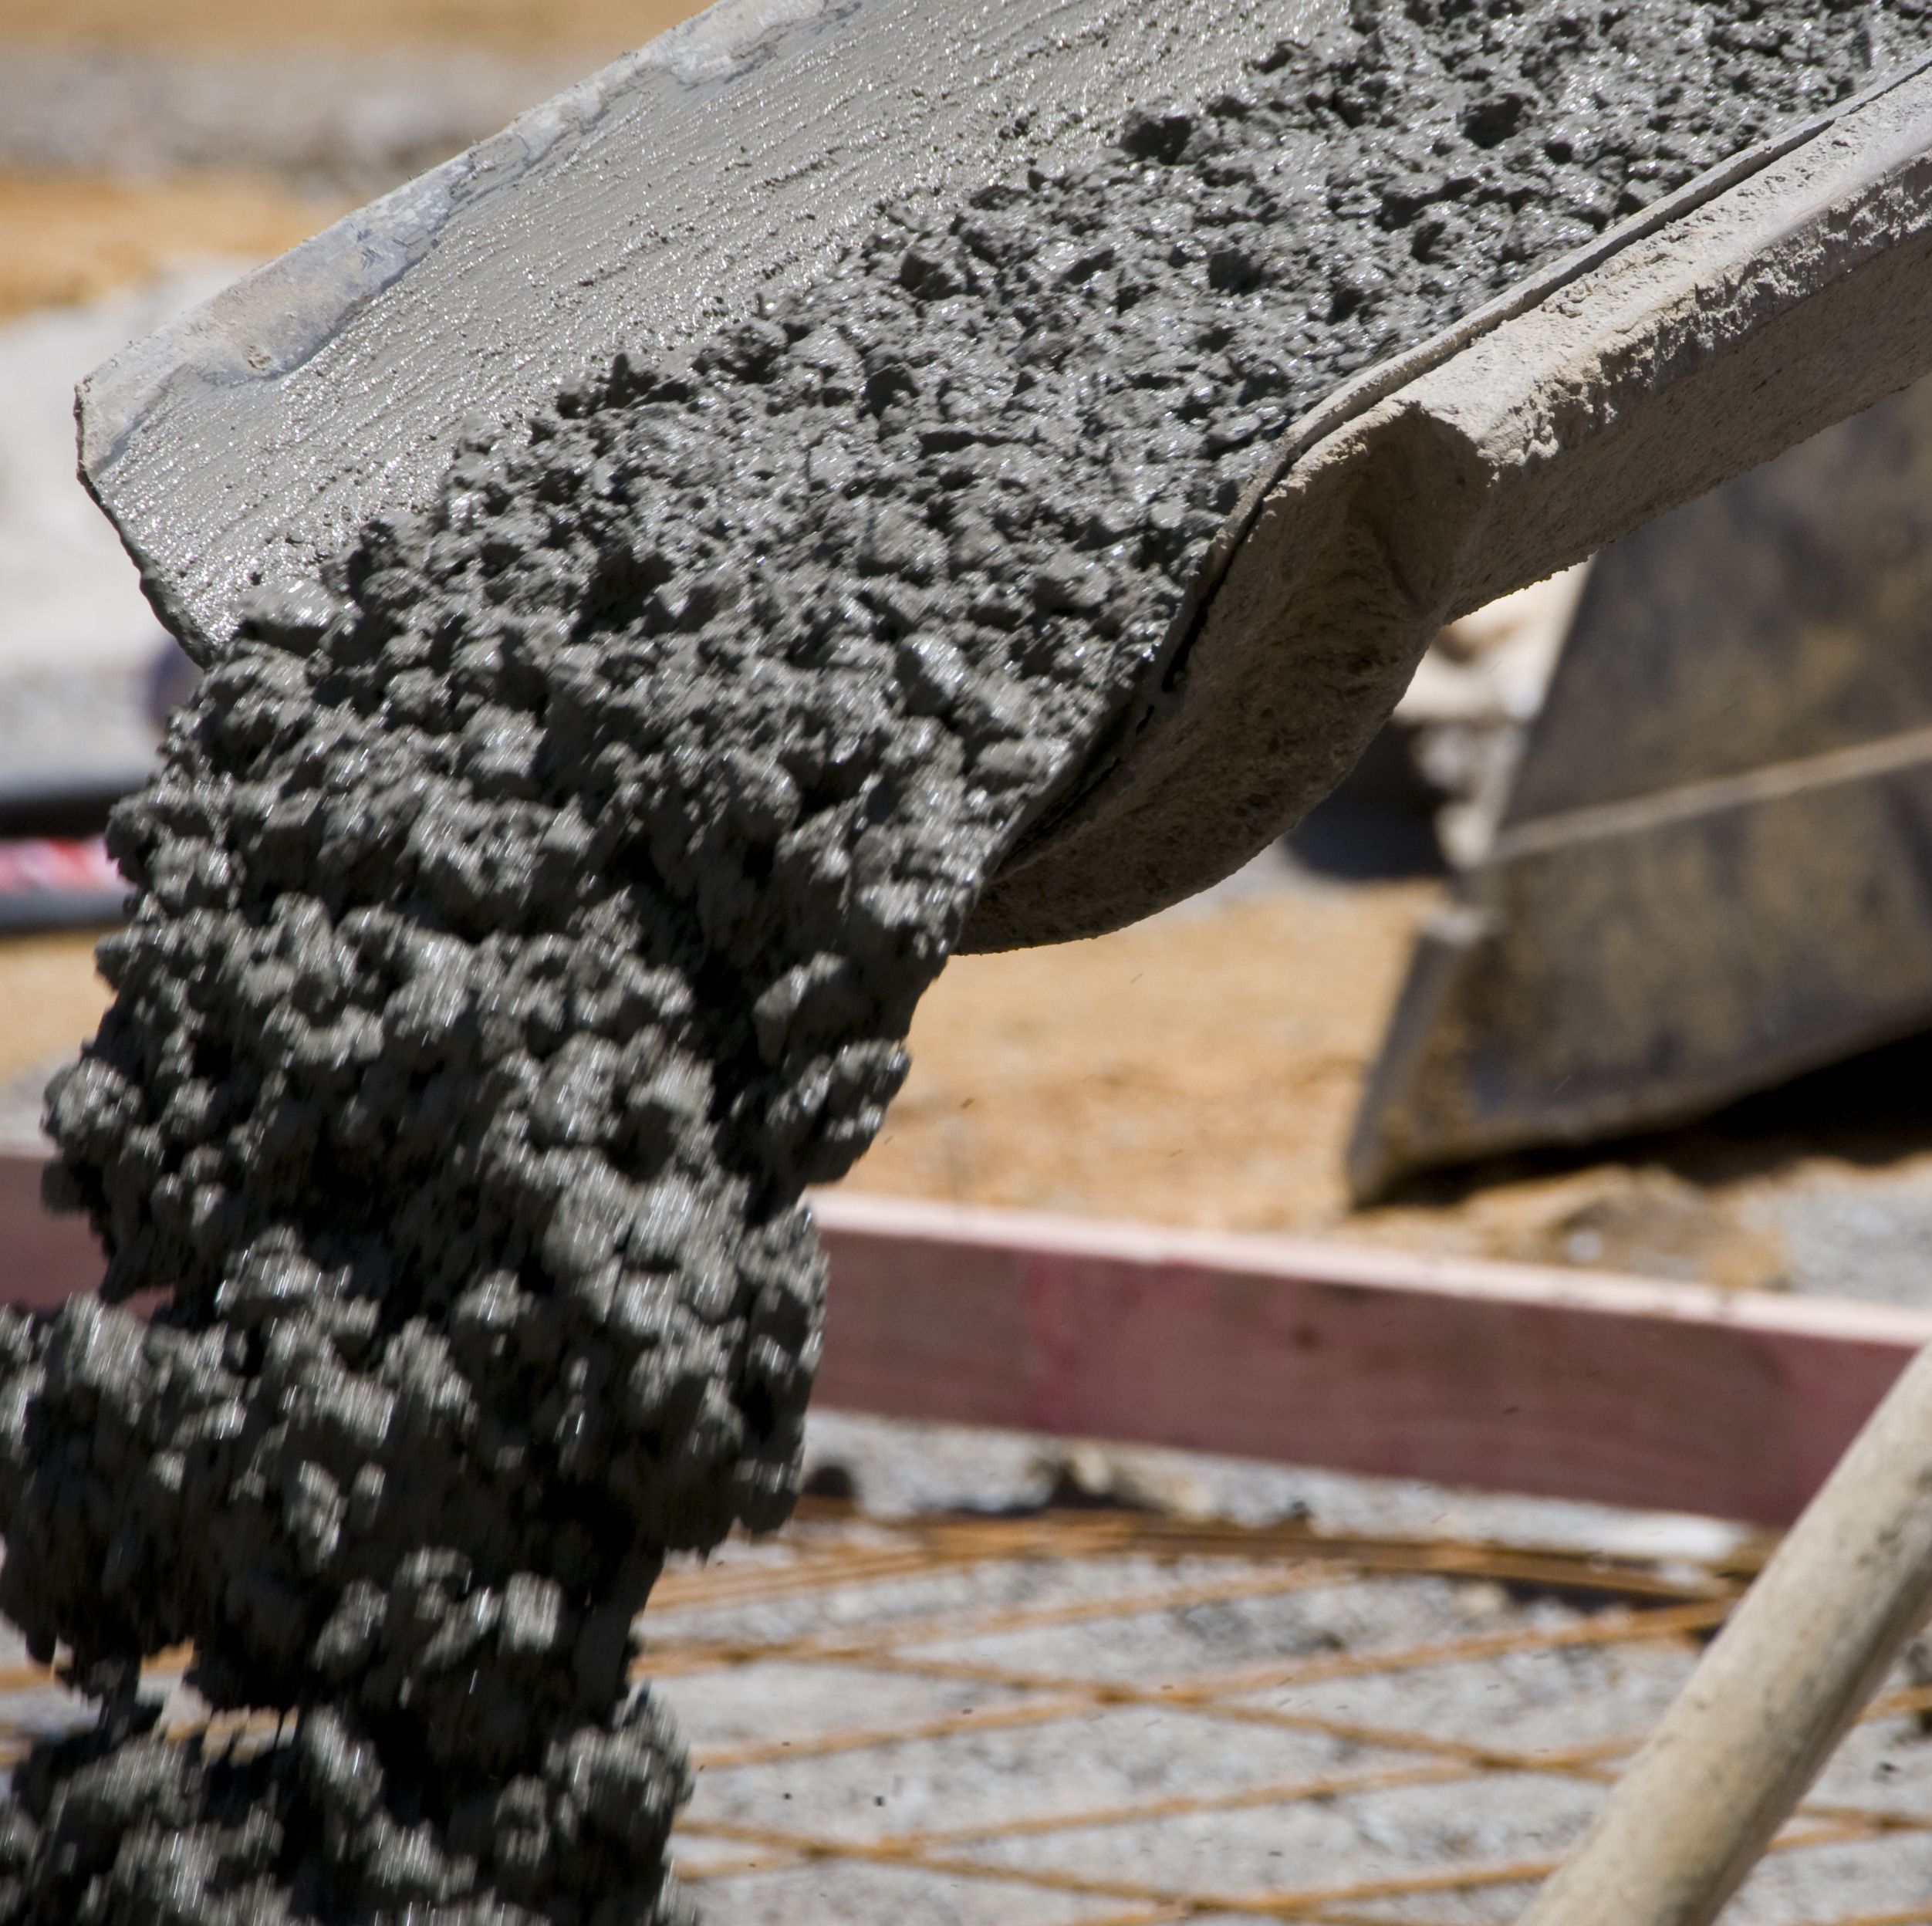 Engineers Just Made Concrete 30% Stronger. The Secret Ingredient? Coffee.